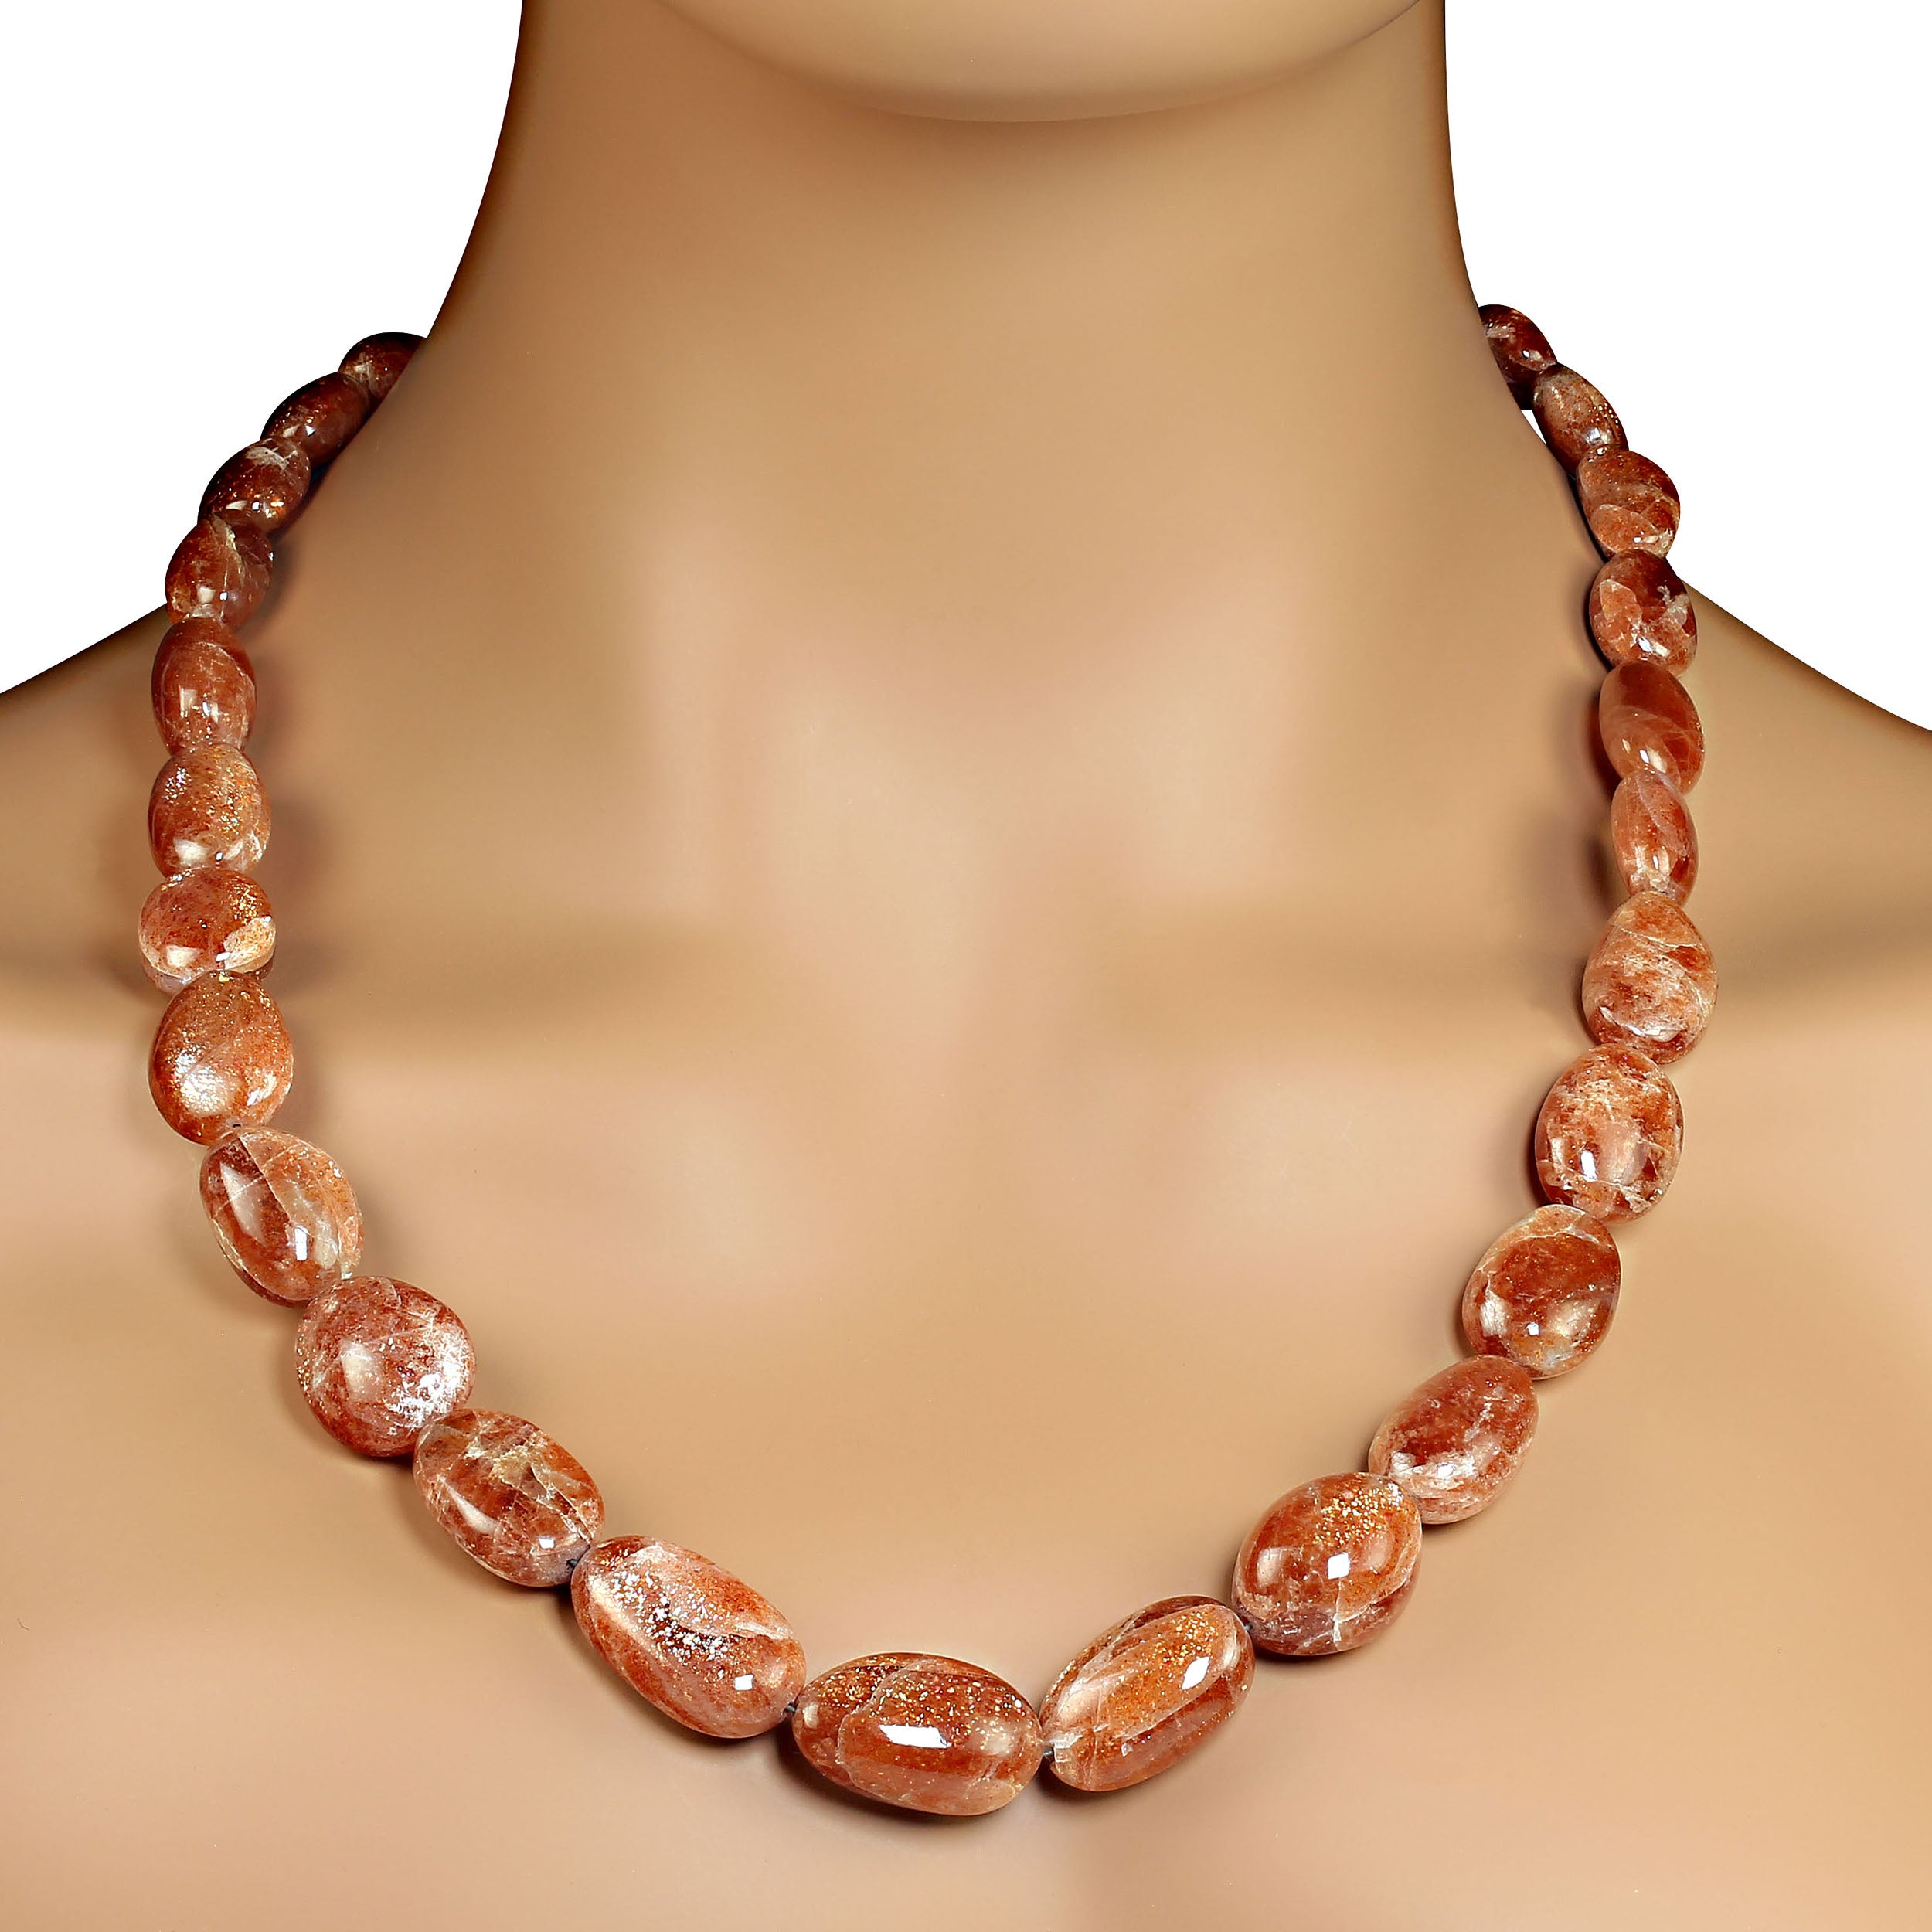 AJD Glorious Graduated 21-inch African Sunstone Necklace    Perfect Gift!